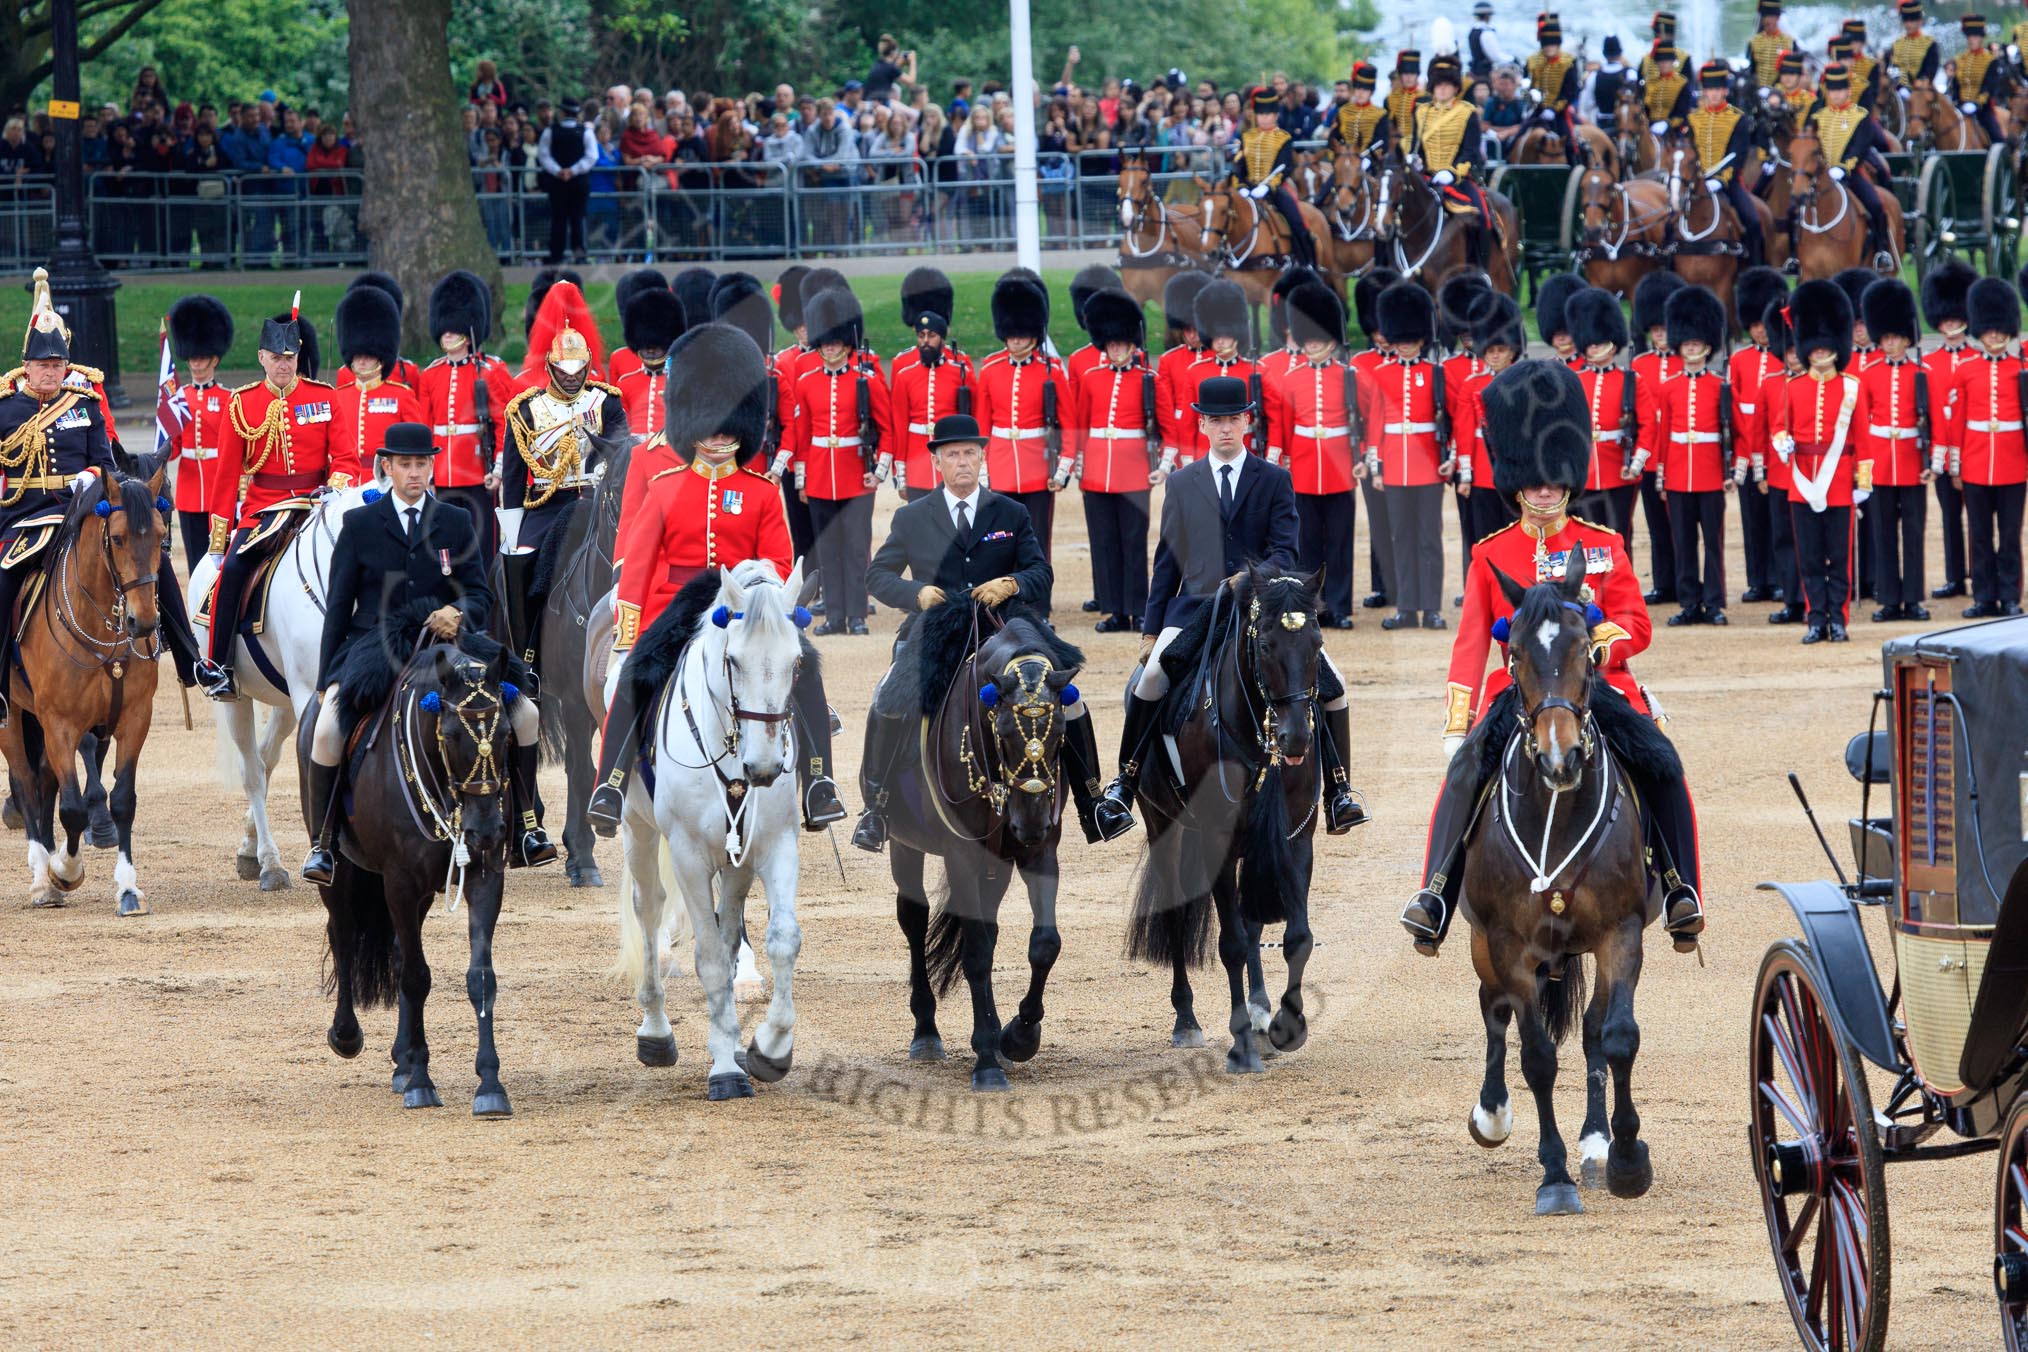 during The Colonel's Review {iptcyear4} (final rehearsal for Trooping the Colour, The Queen's Birthday Parade)  at Horse Guards Parade, Westminster, London, 2 June 2018, 11:05.